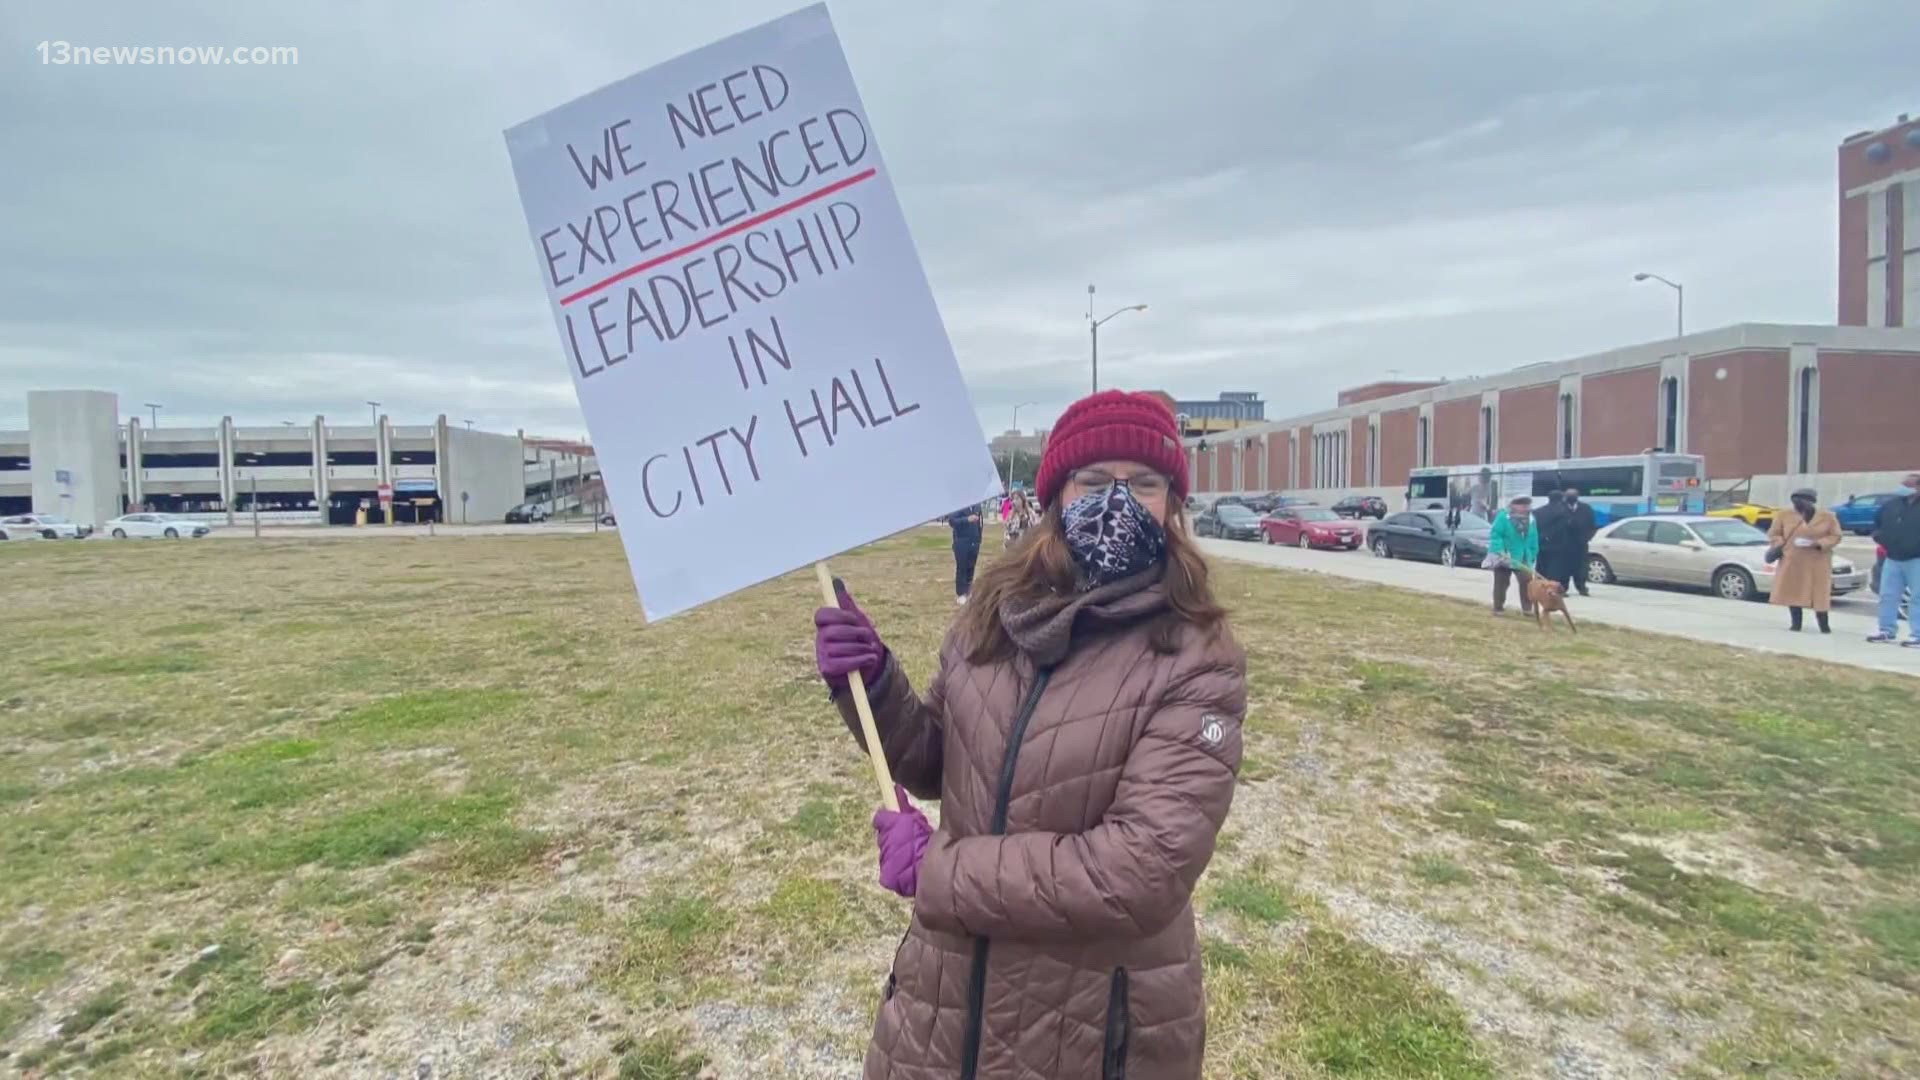 There were groups pleading for city leaders to choose a different candidate, and others who were sure Meeks is right for the job. The city council will decide.